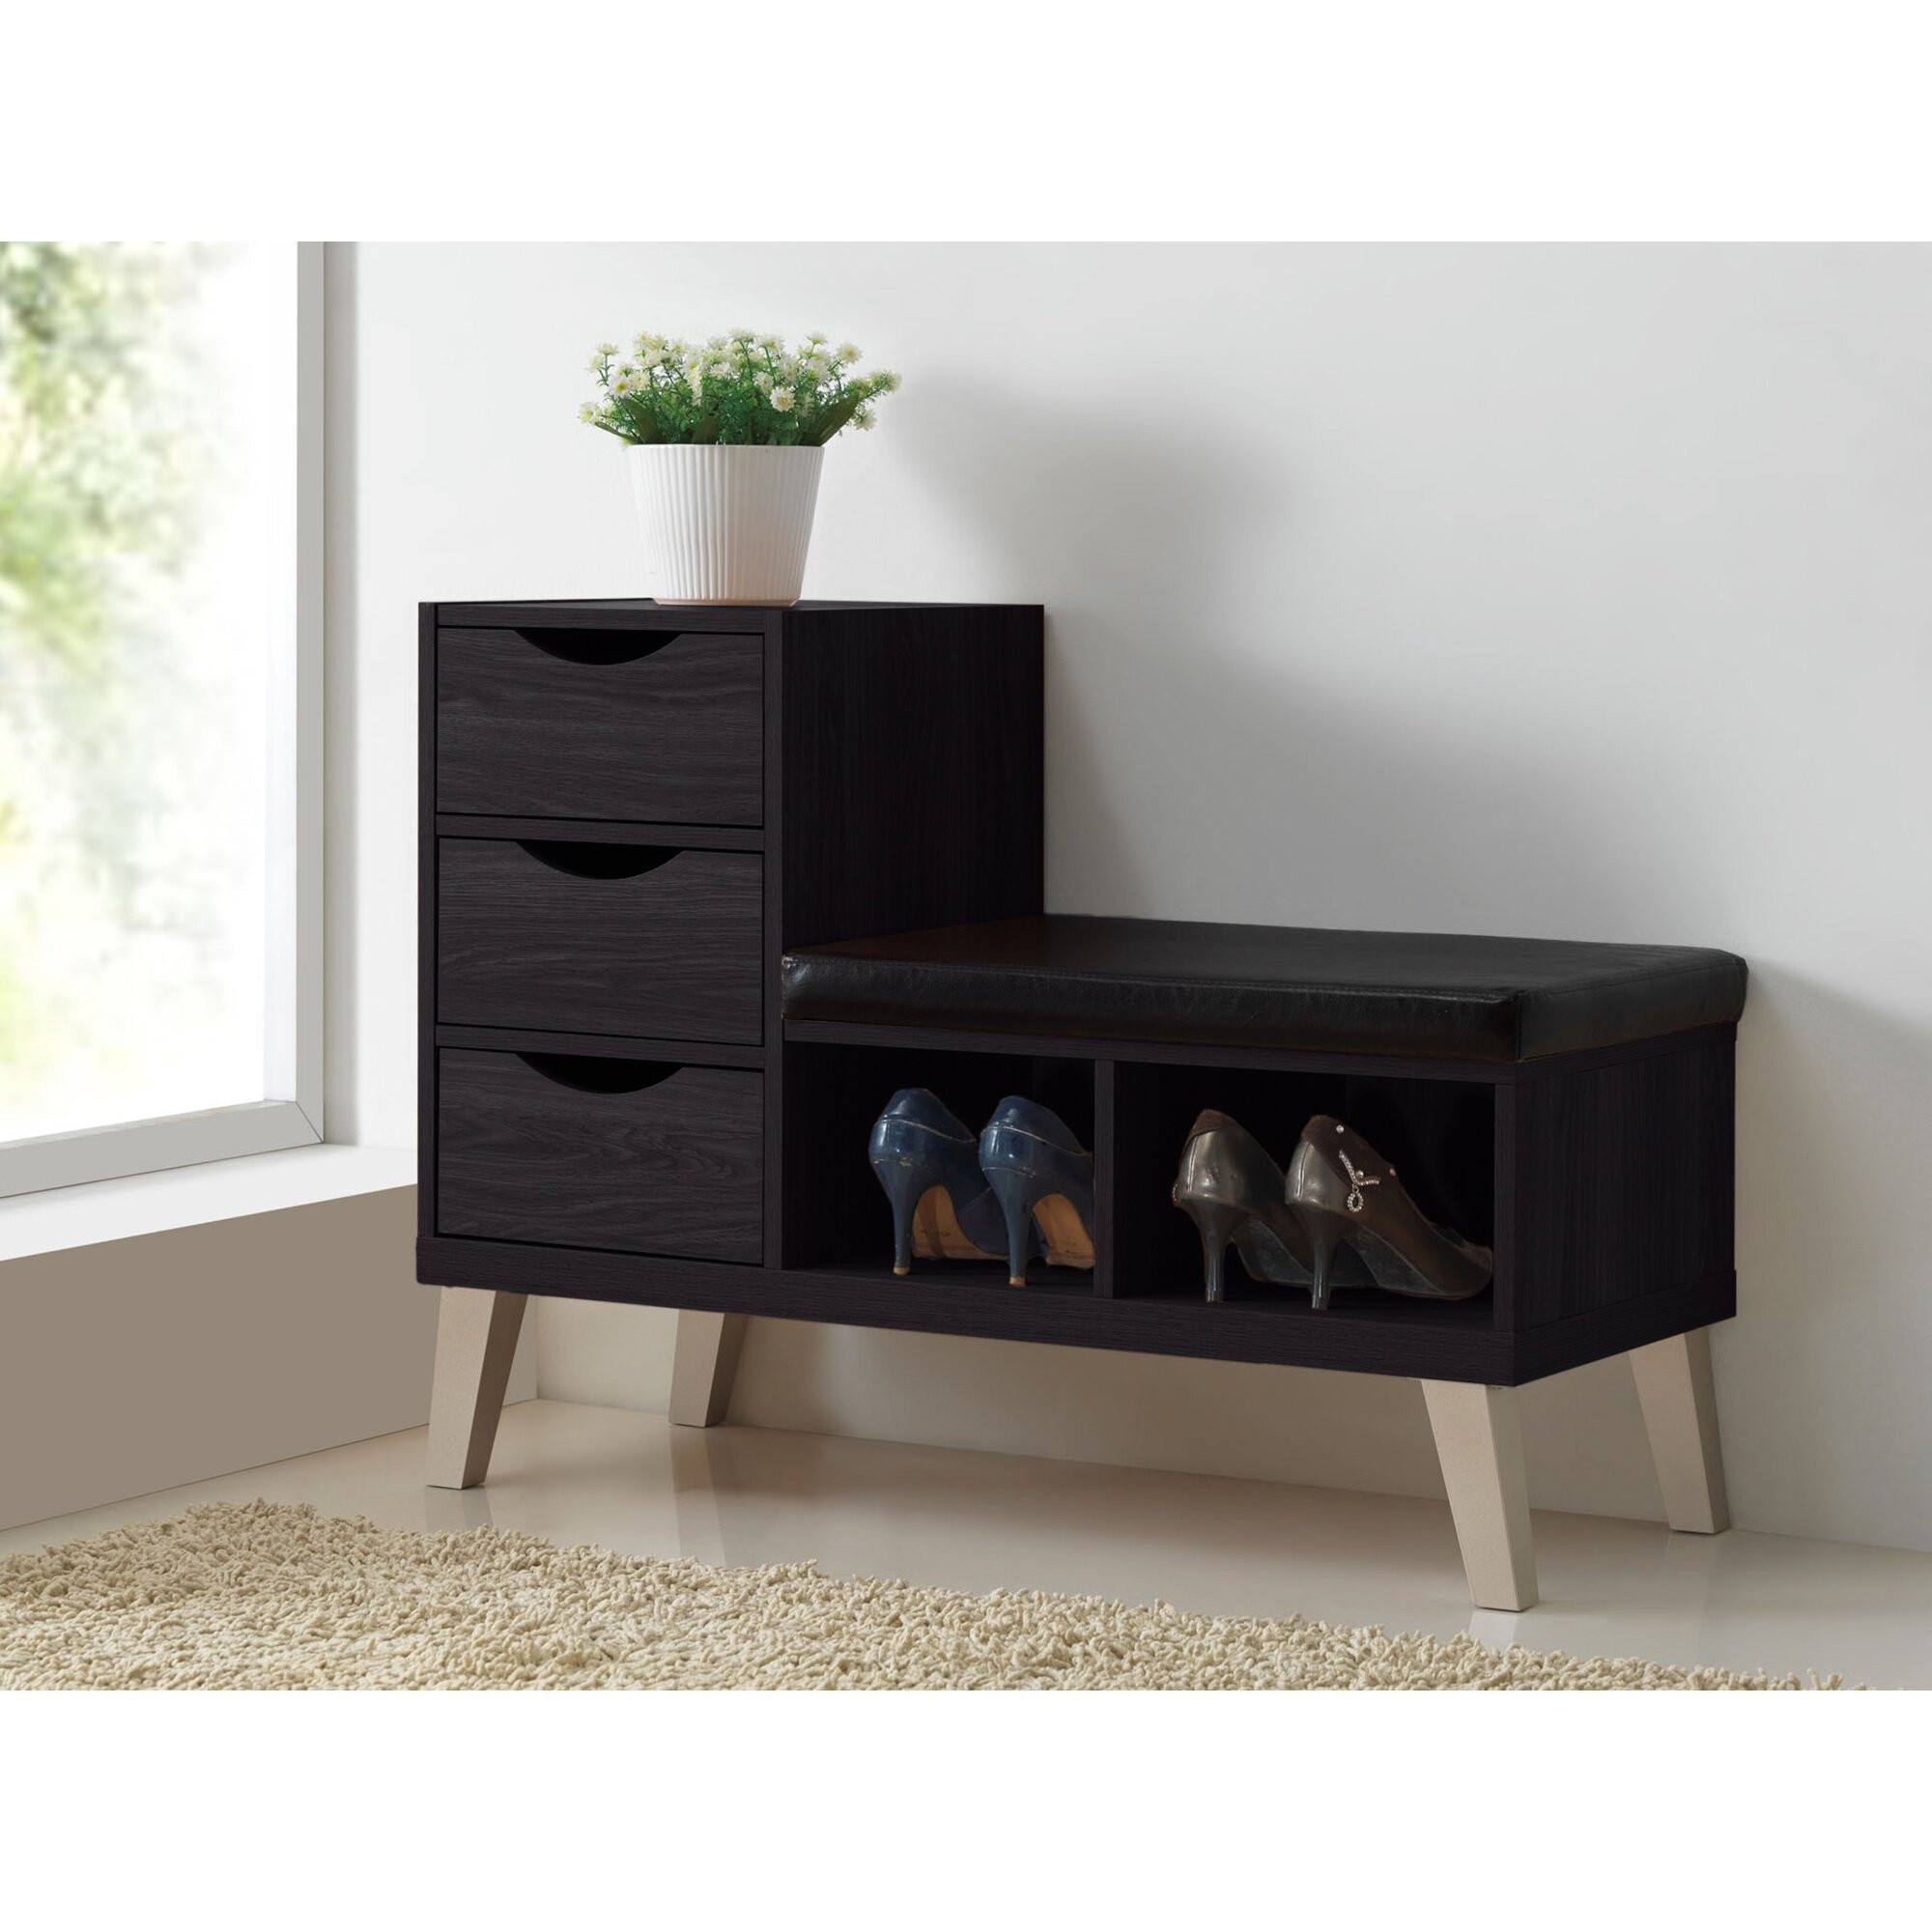 Modern Entryway Bench With Storage
 Baxton Studio Arielle Upholstered Storage Entryway Bench